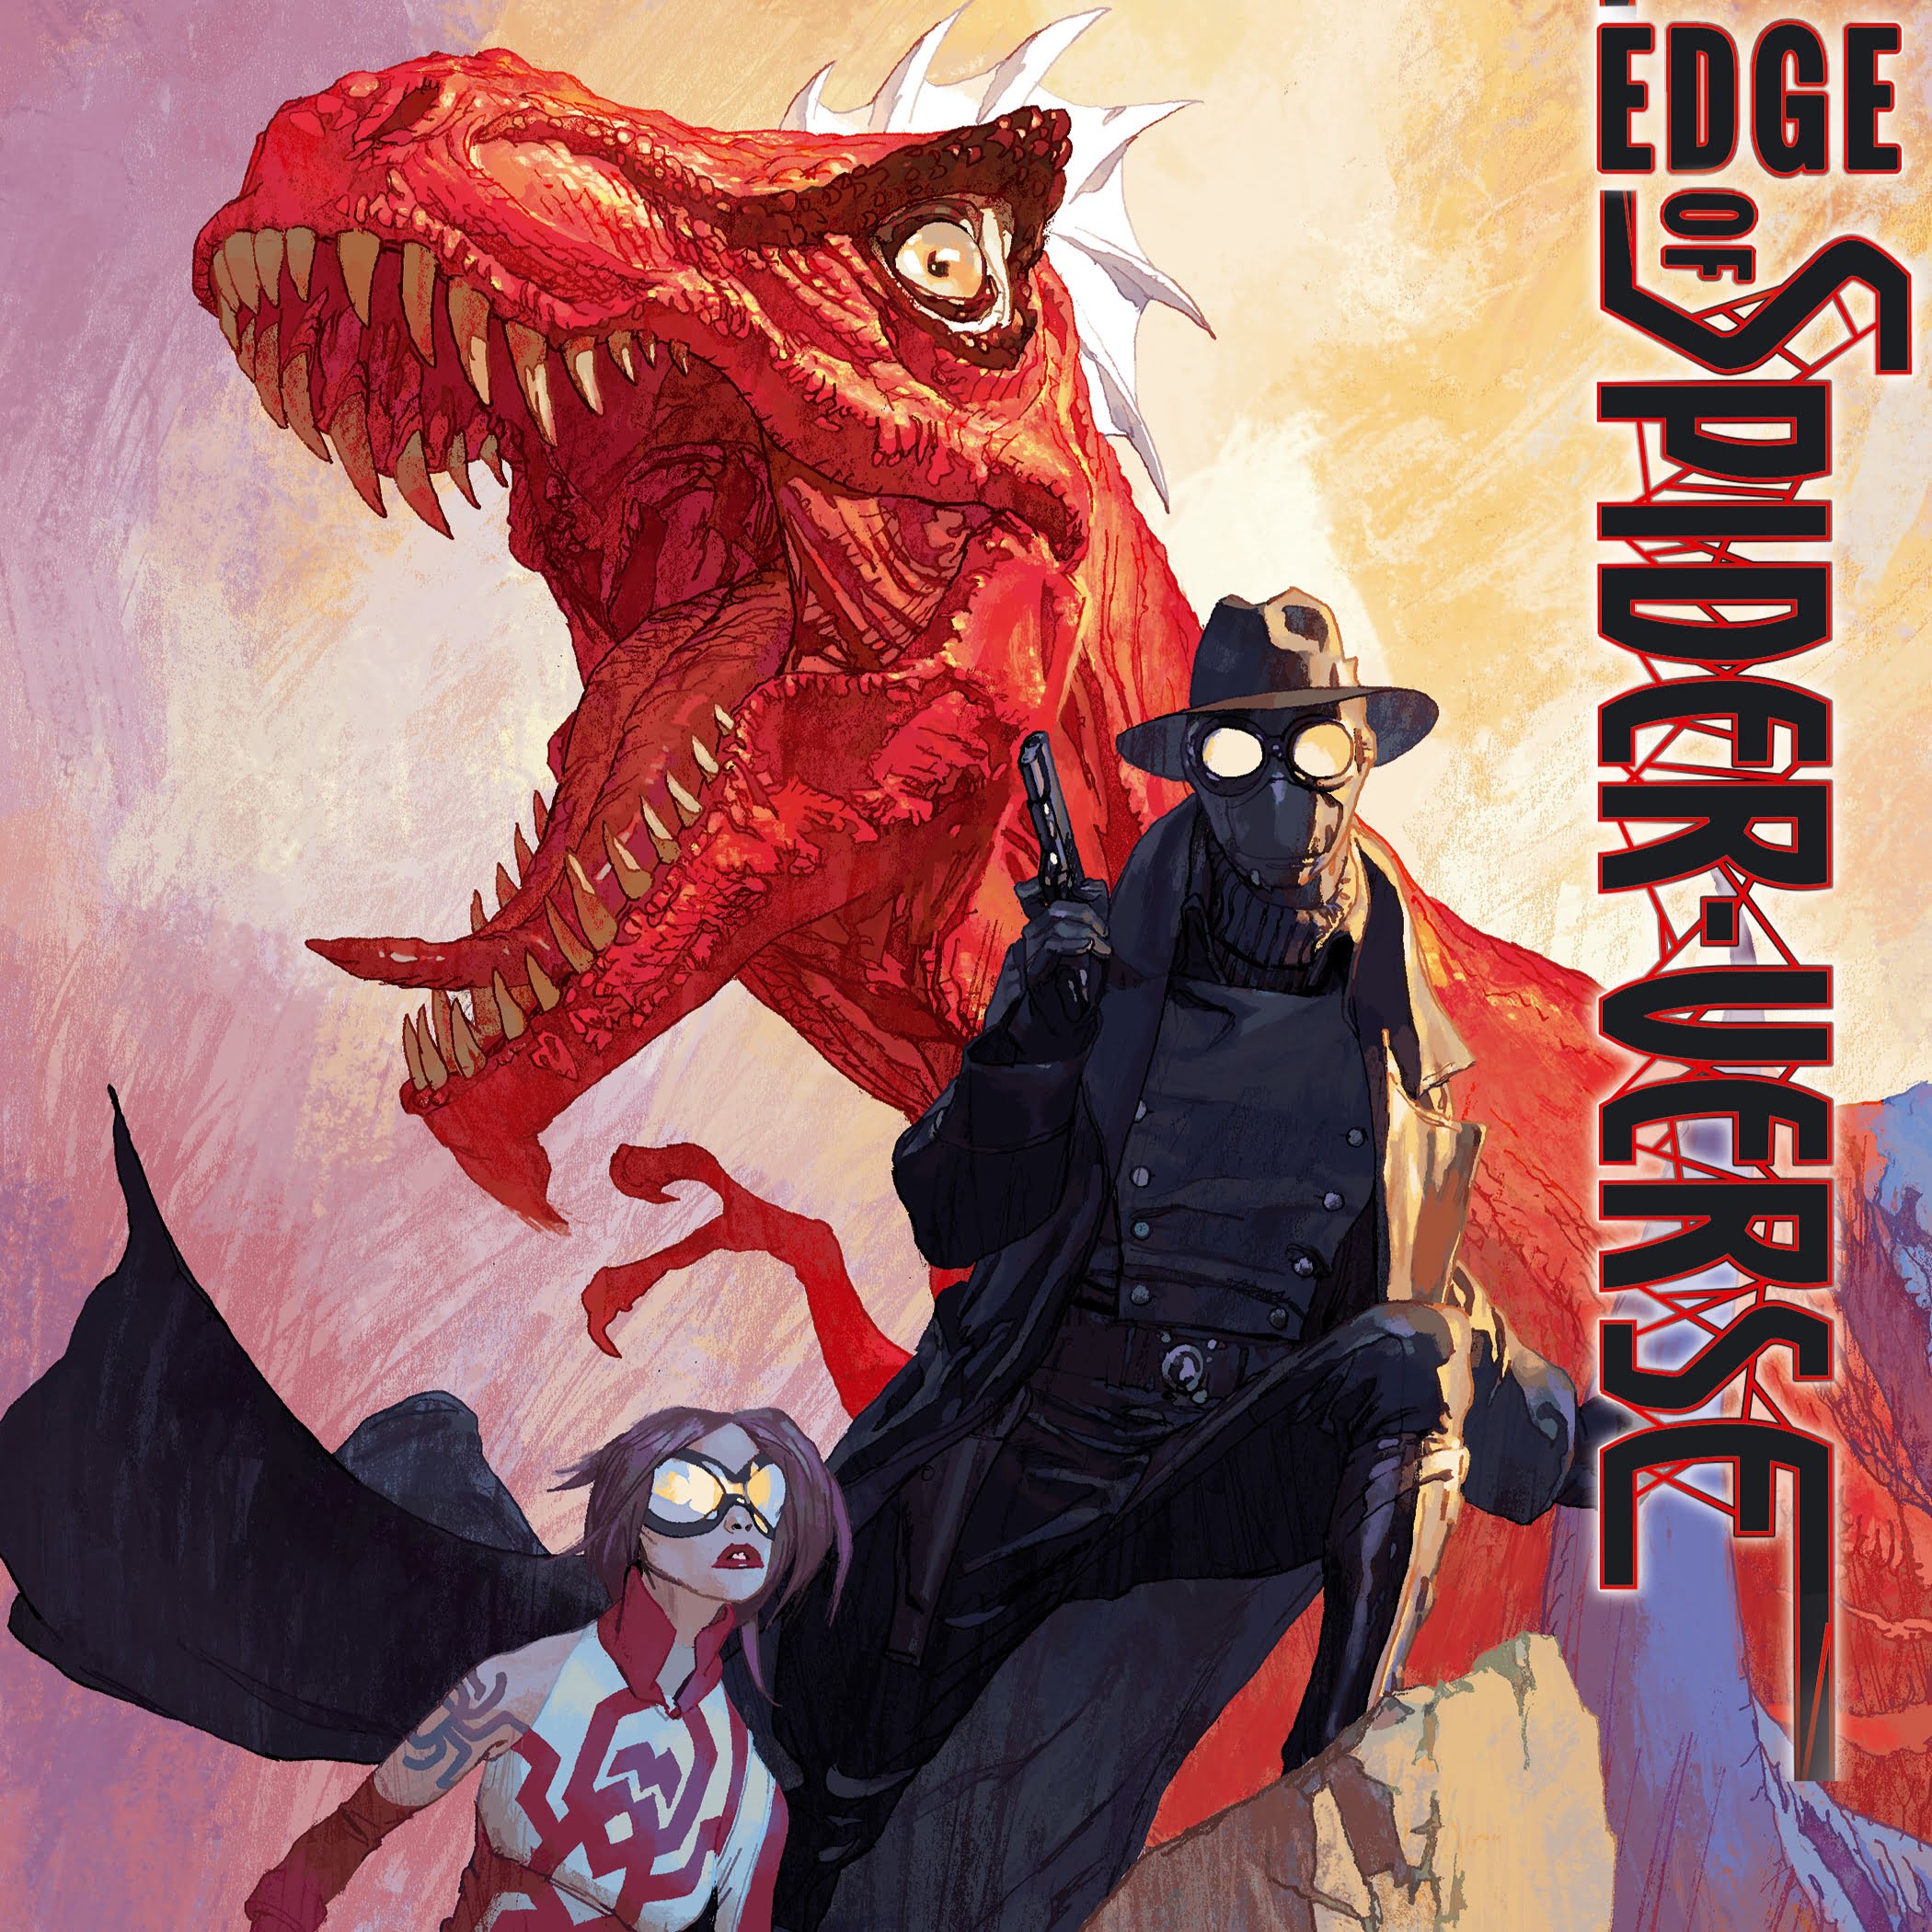 Edge of Spider-verse via Anthony Blackwood for Marvel Comics for use by 360 Magazine